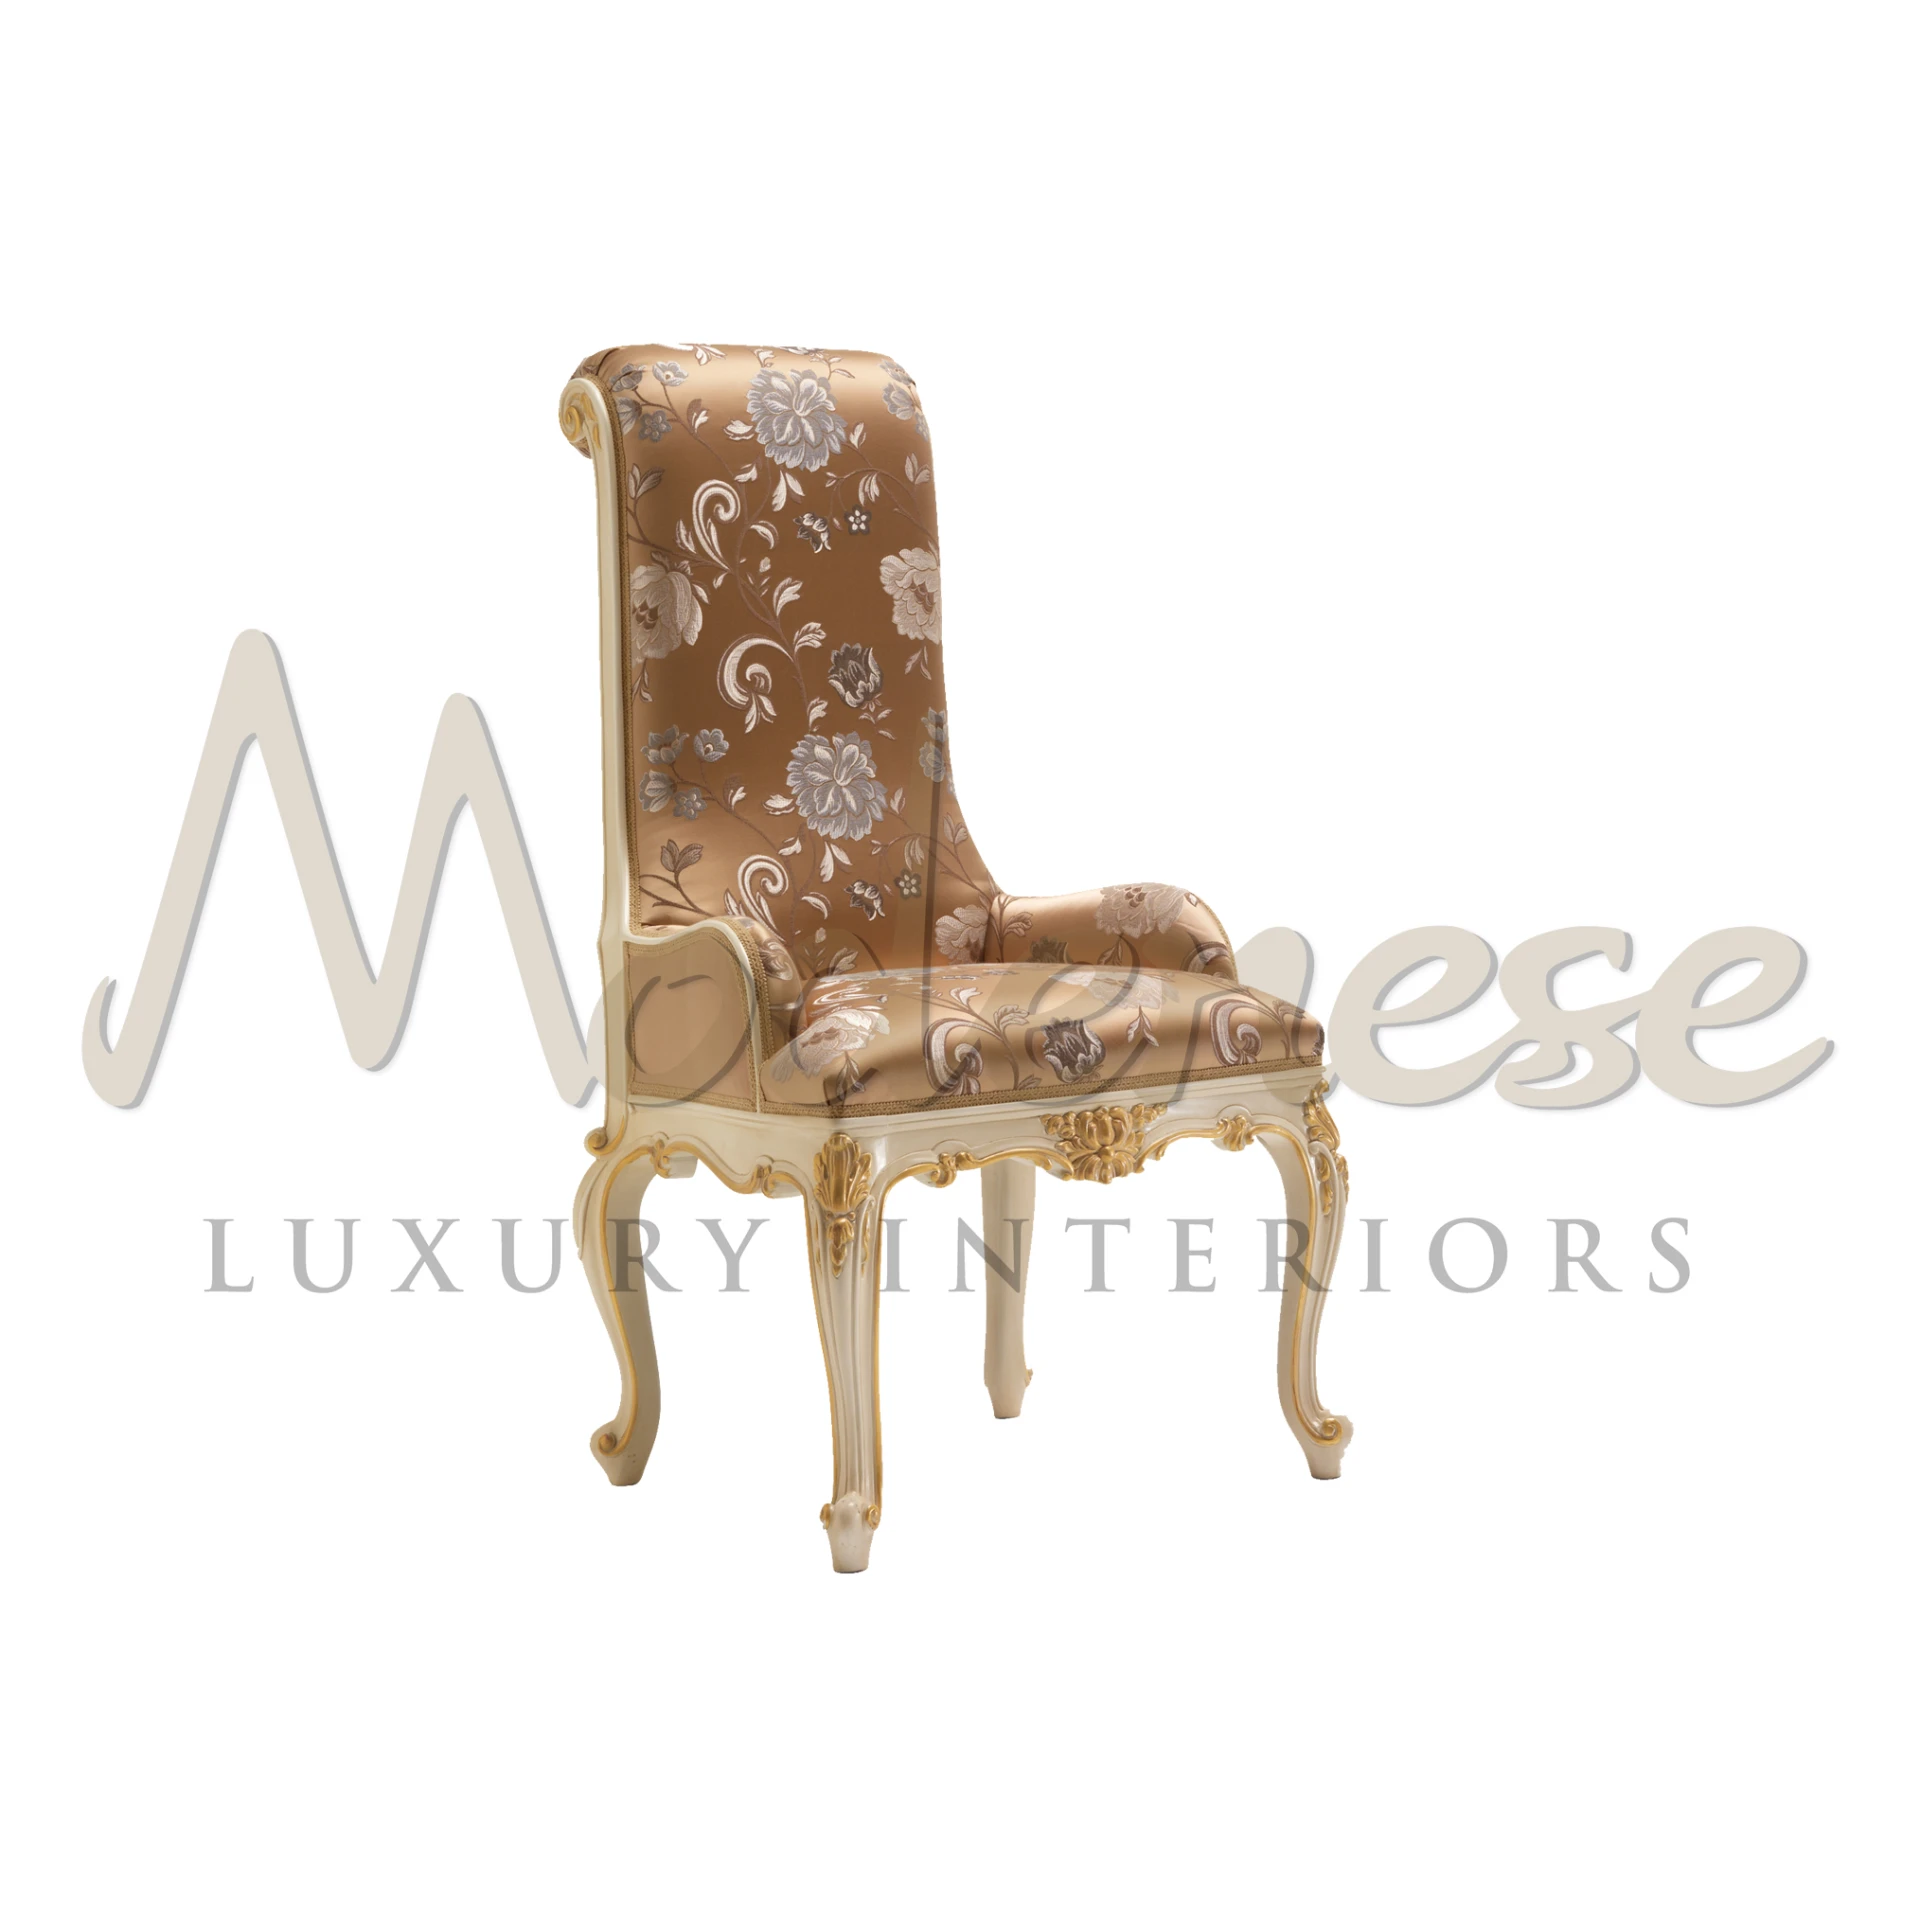 Finely hand carved Italian chair with armrests with Ivory lacquered finishing and gold leaf details